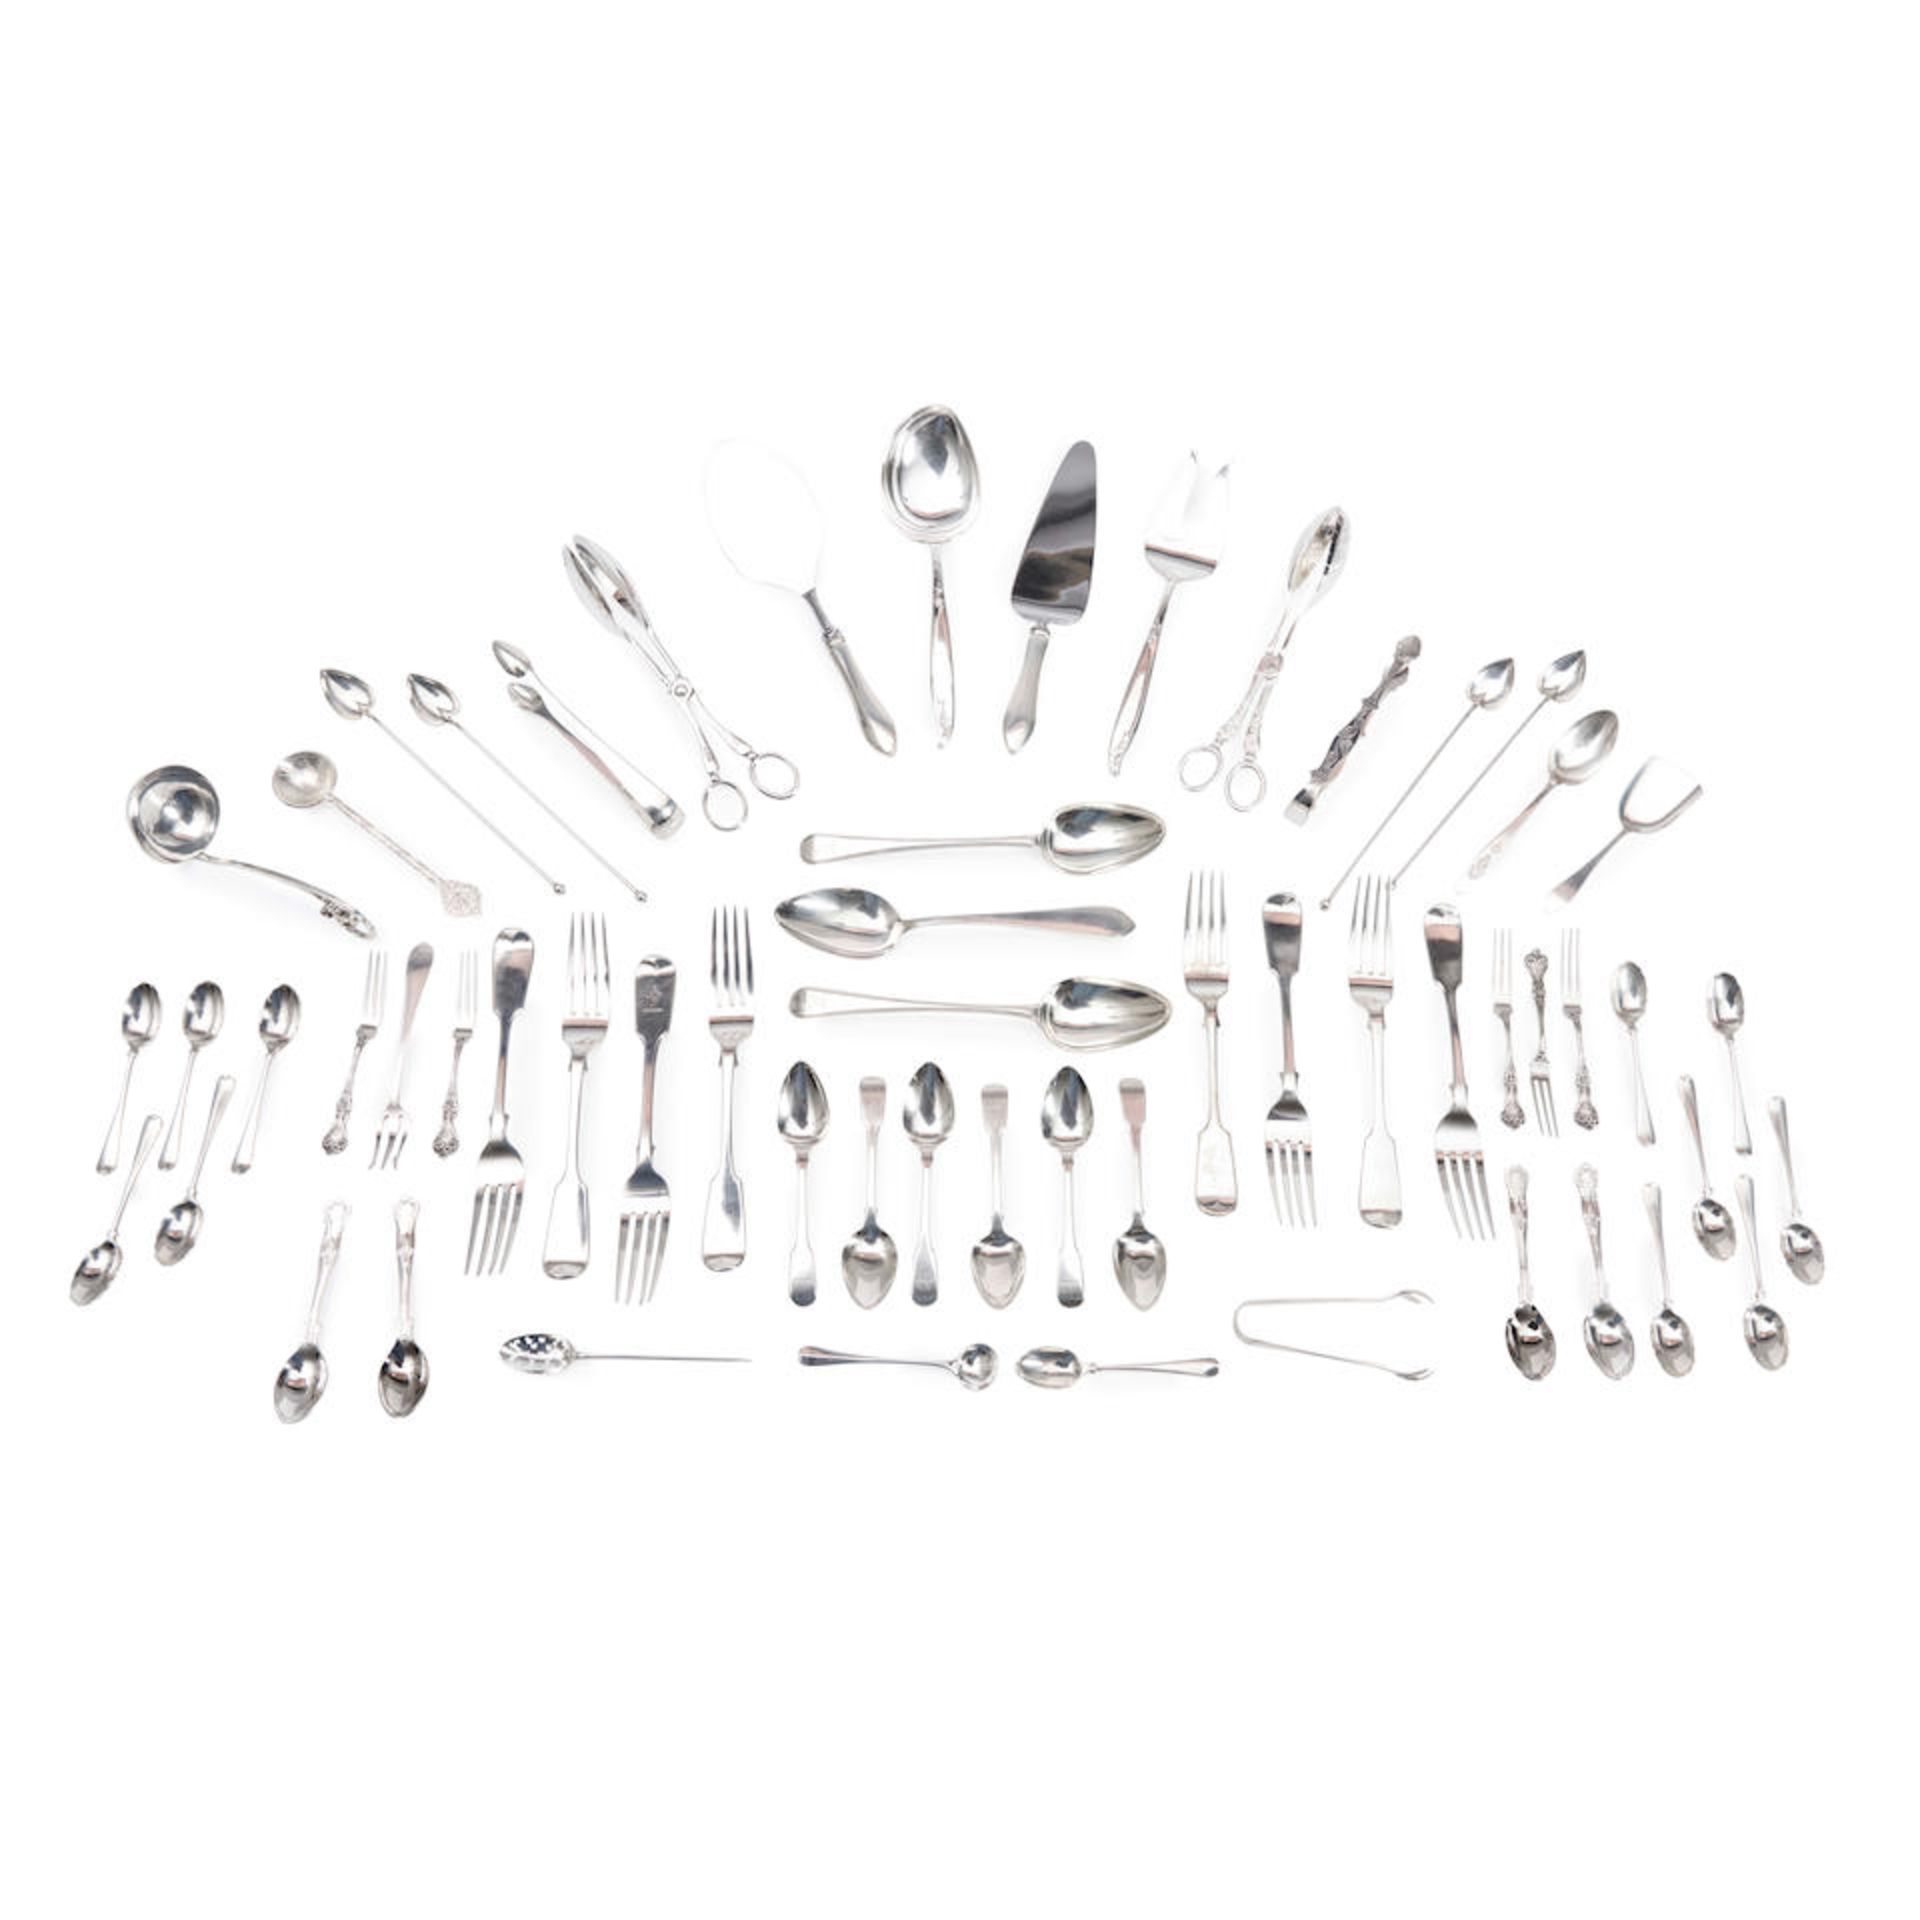 GROUP OF ENGLISH AND AMERICAN STERLING SILVER AND SILVER-PLATED TABLEWARE